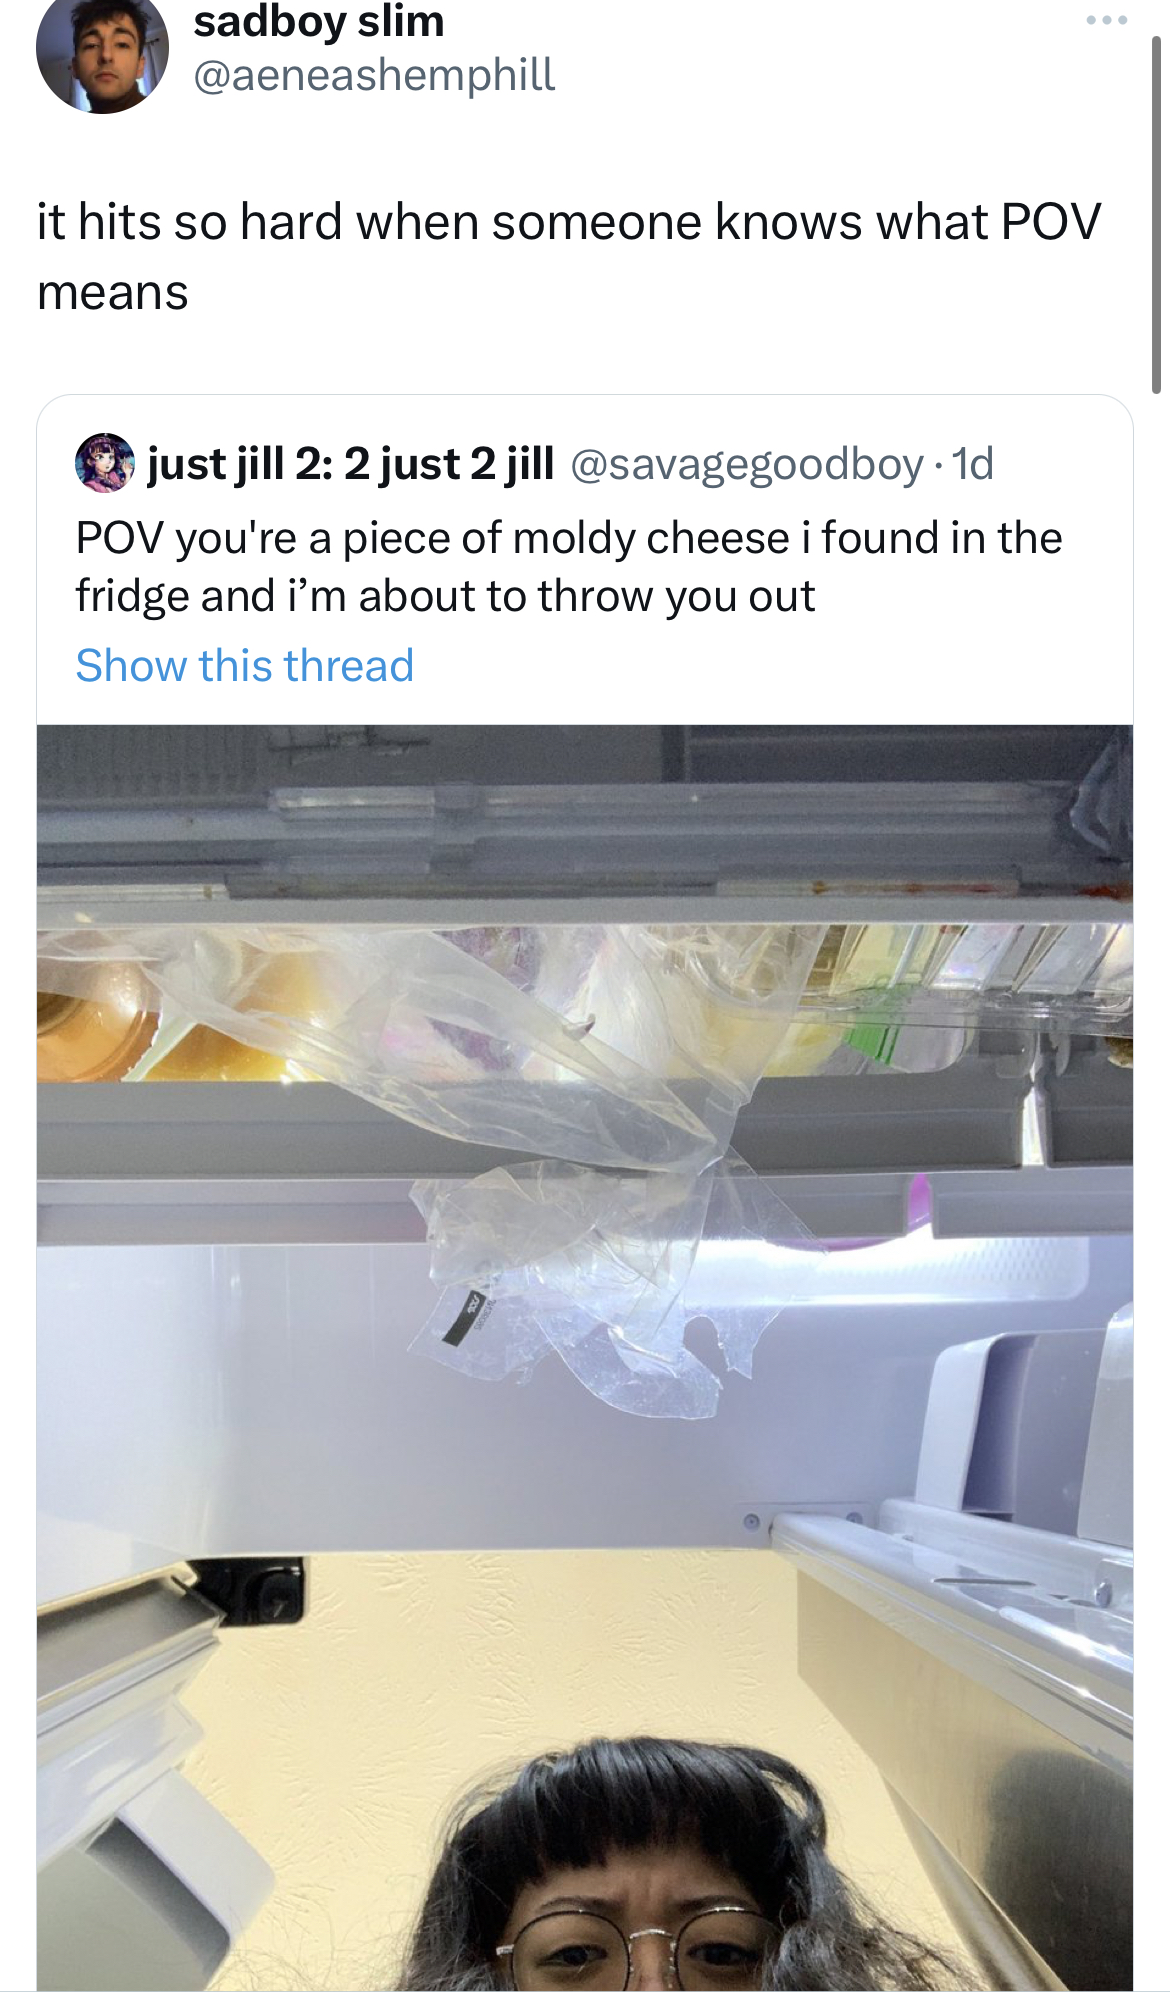 savage and funny tweets -sadboy slim it hits so hard when someone knows what Pov means just jill 2 2 just 2 jill Pov you're a piece of moldy cheese i found in the fridge and i'm about to throw you out Show this thread